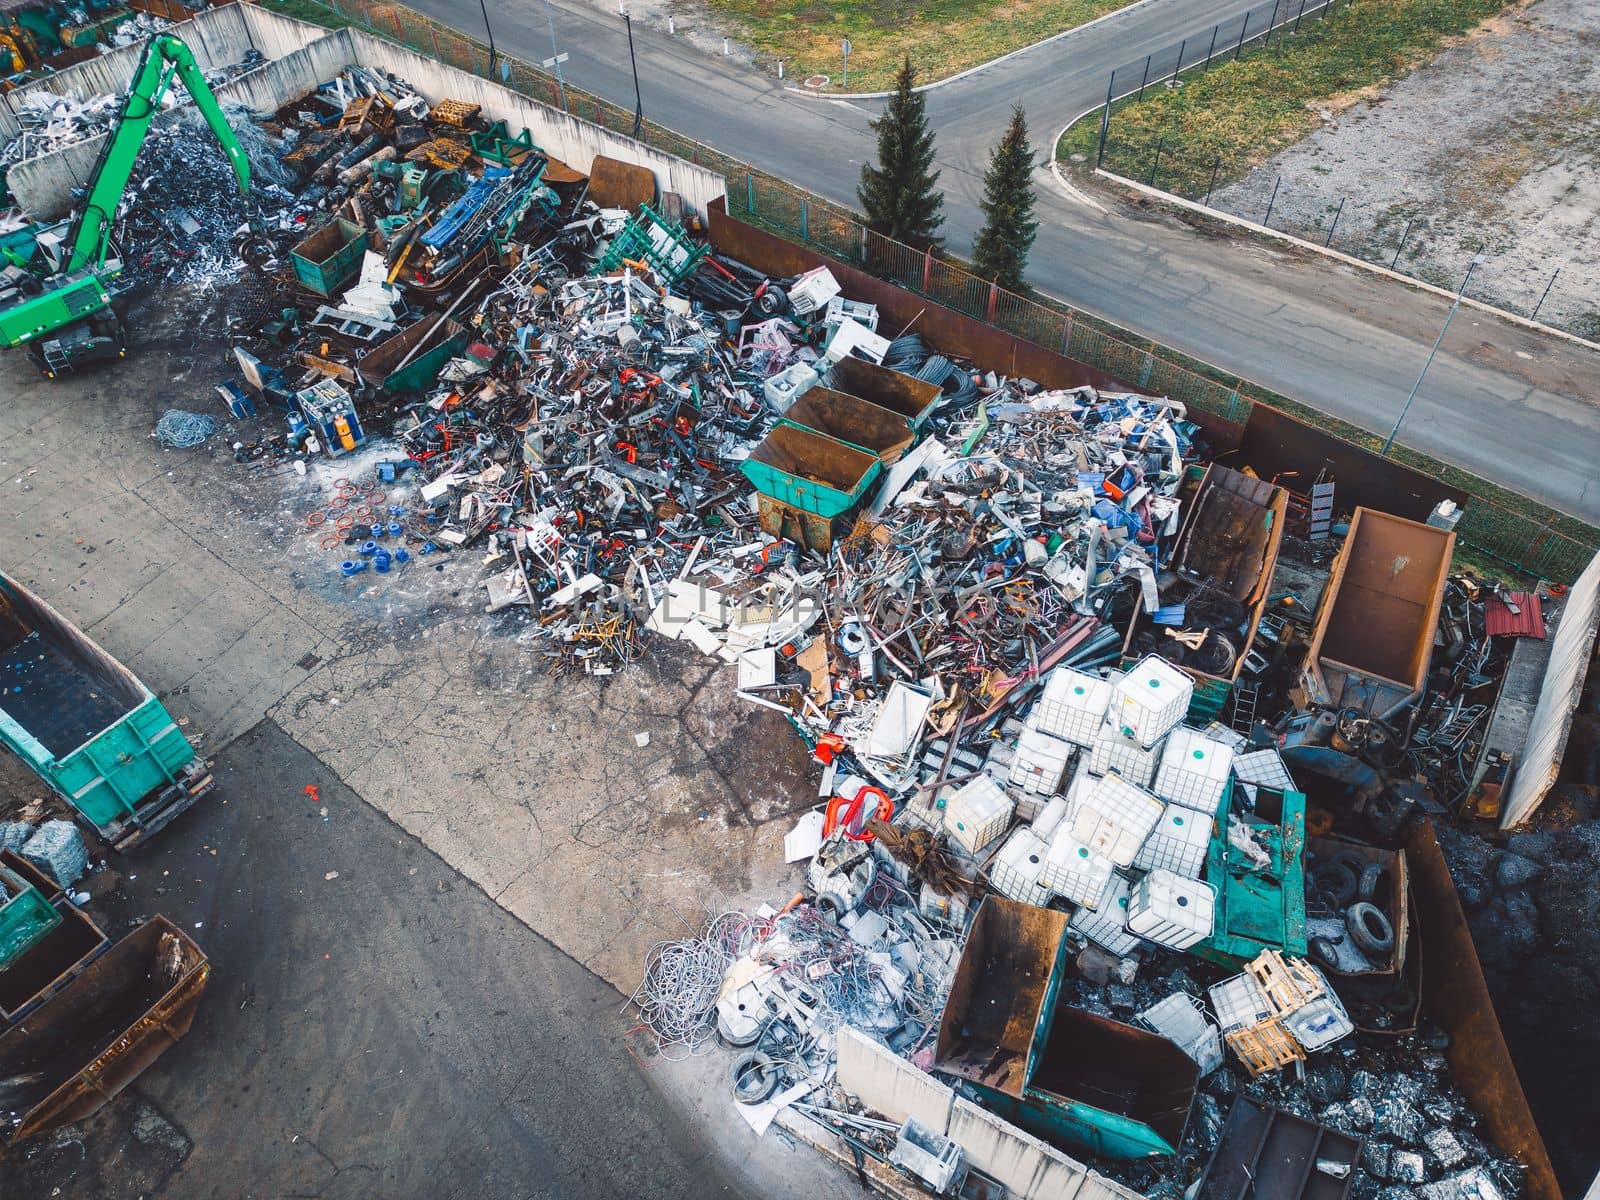 Aerial view, drone shoot of recycling center, containers for sorting out different garbage materials. Excess garbage problems. Reduce, reuse, recycle.